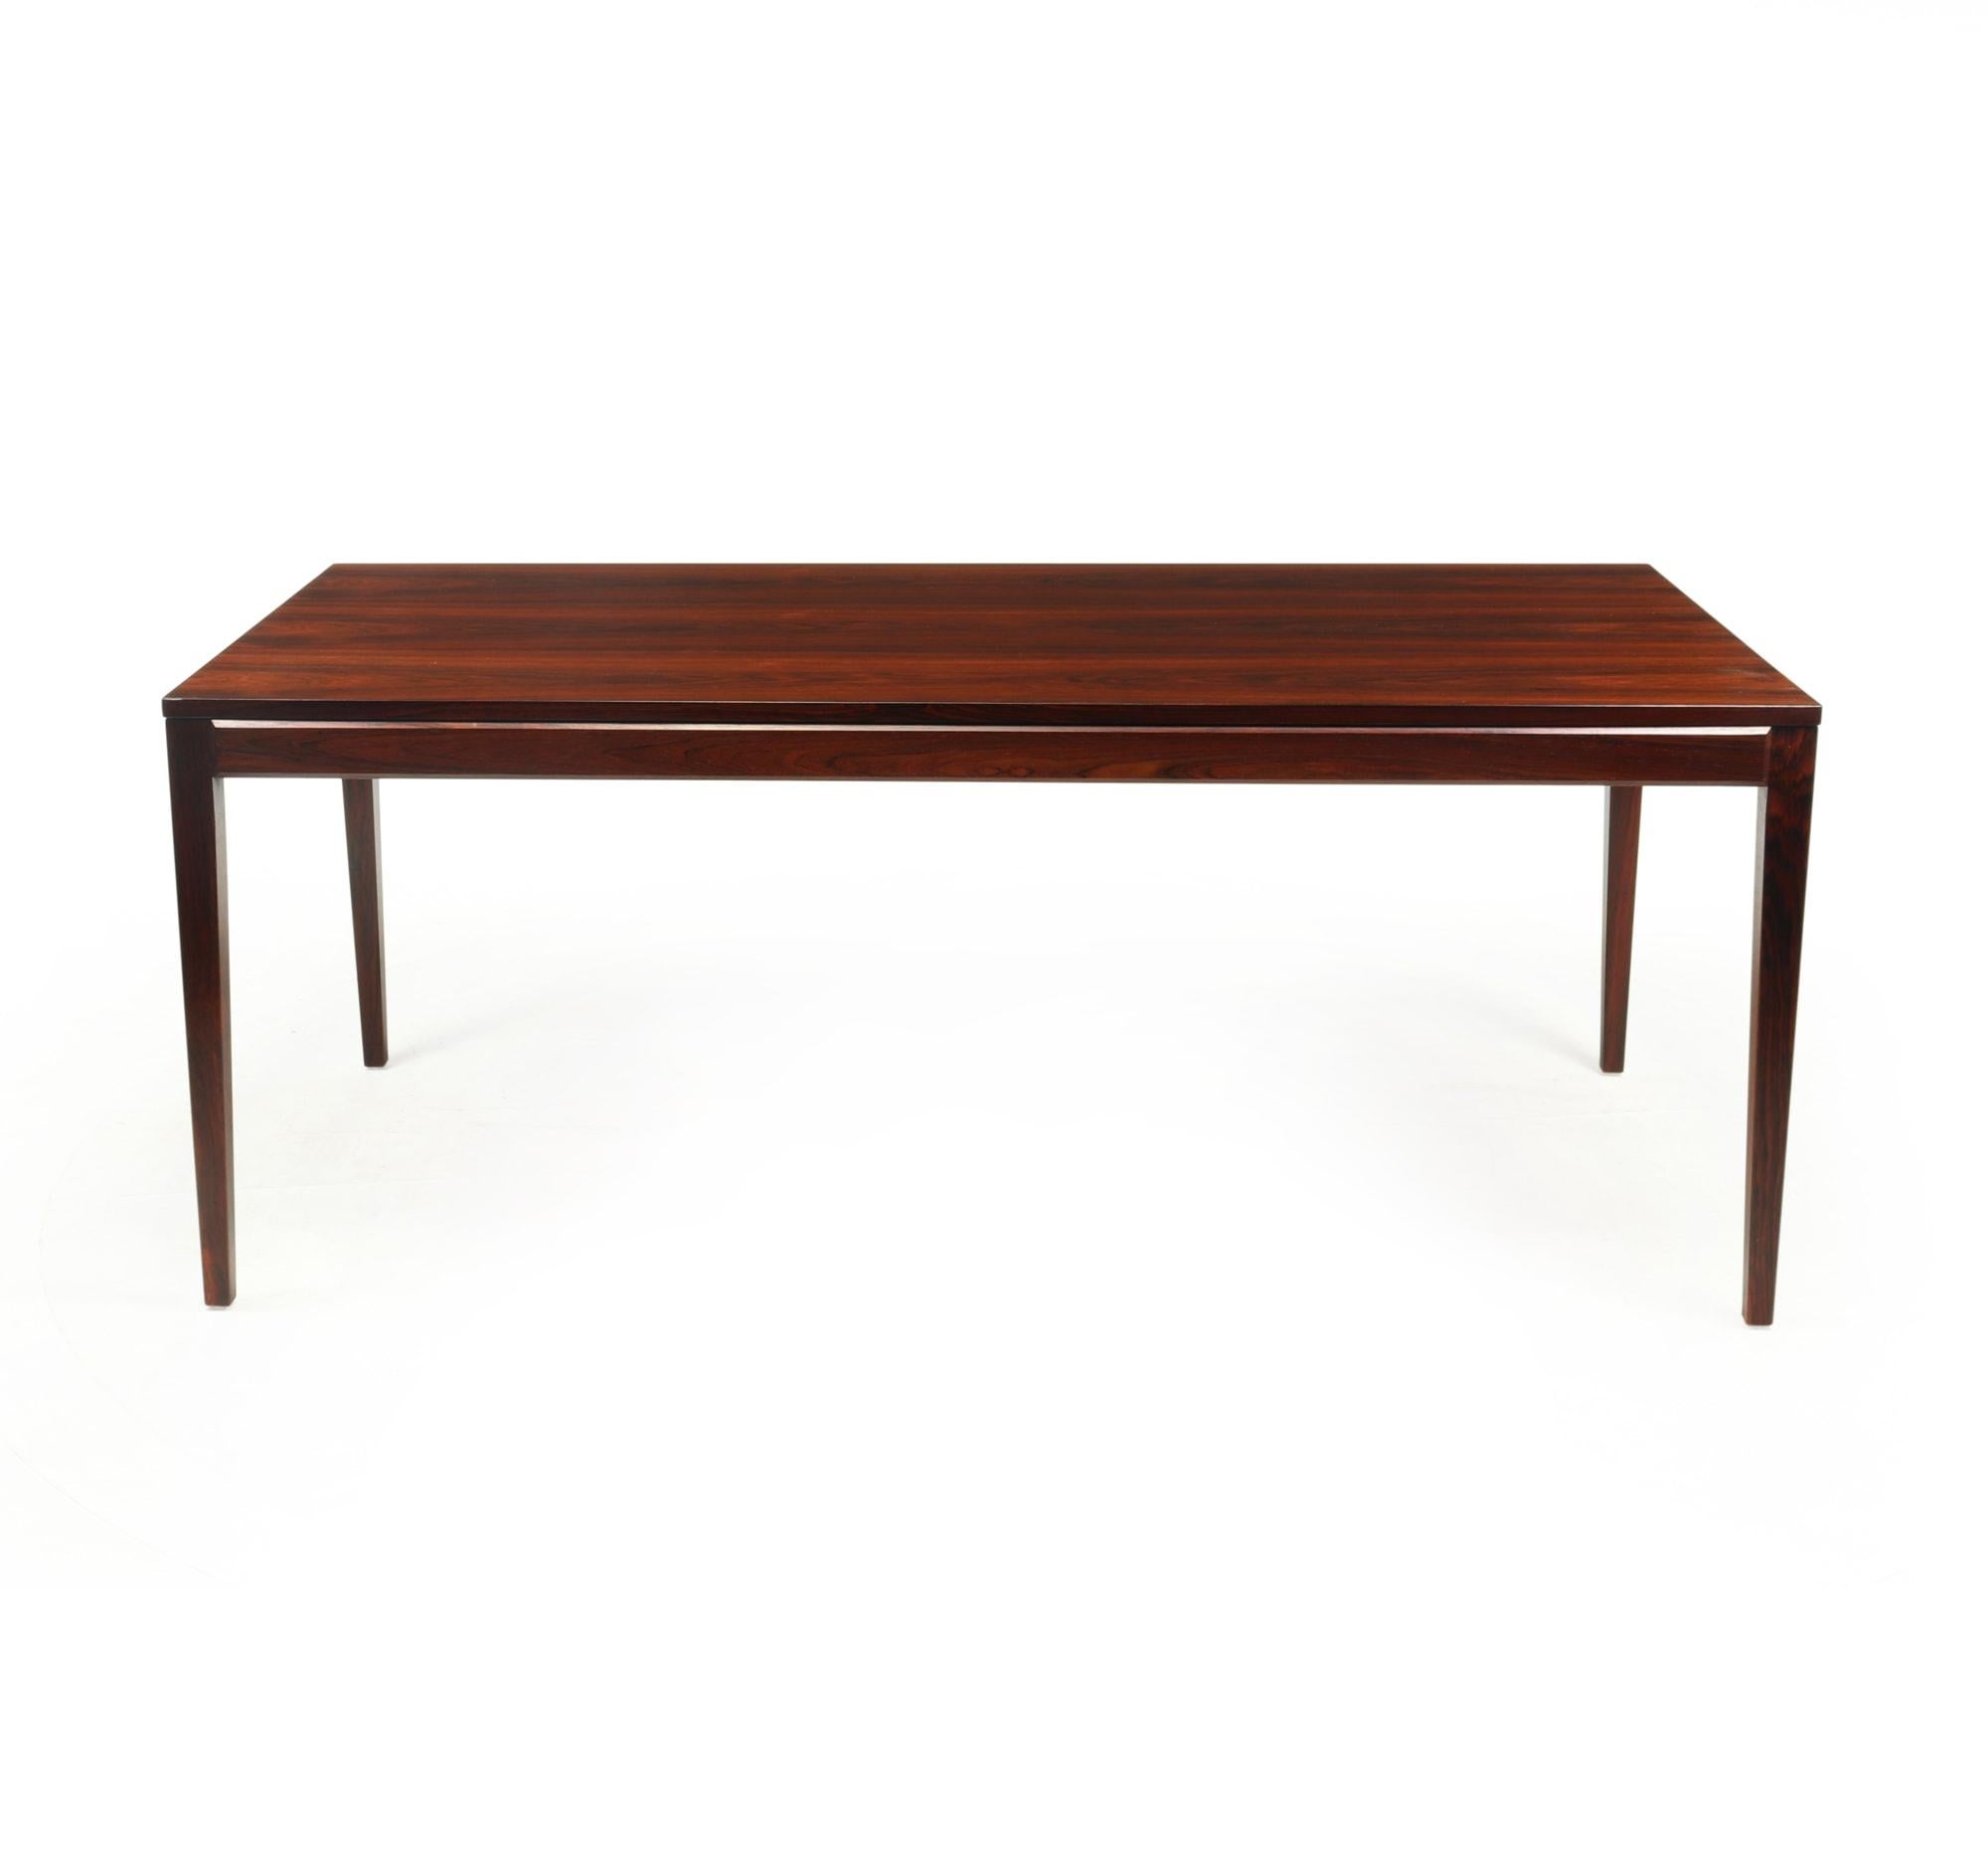 A Lovely quality coffee table produced in Sweden in the 1960s by furniture makers Slutarp the table has had its top polished and is in excellent condition throughout

Age: 1960

Style: Mid Century Modern

Material: Rosewood

Origin :